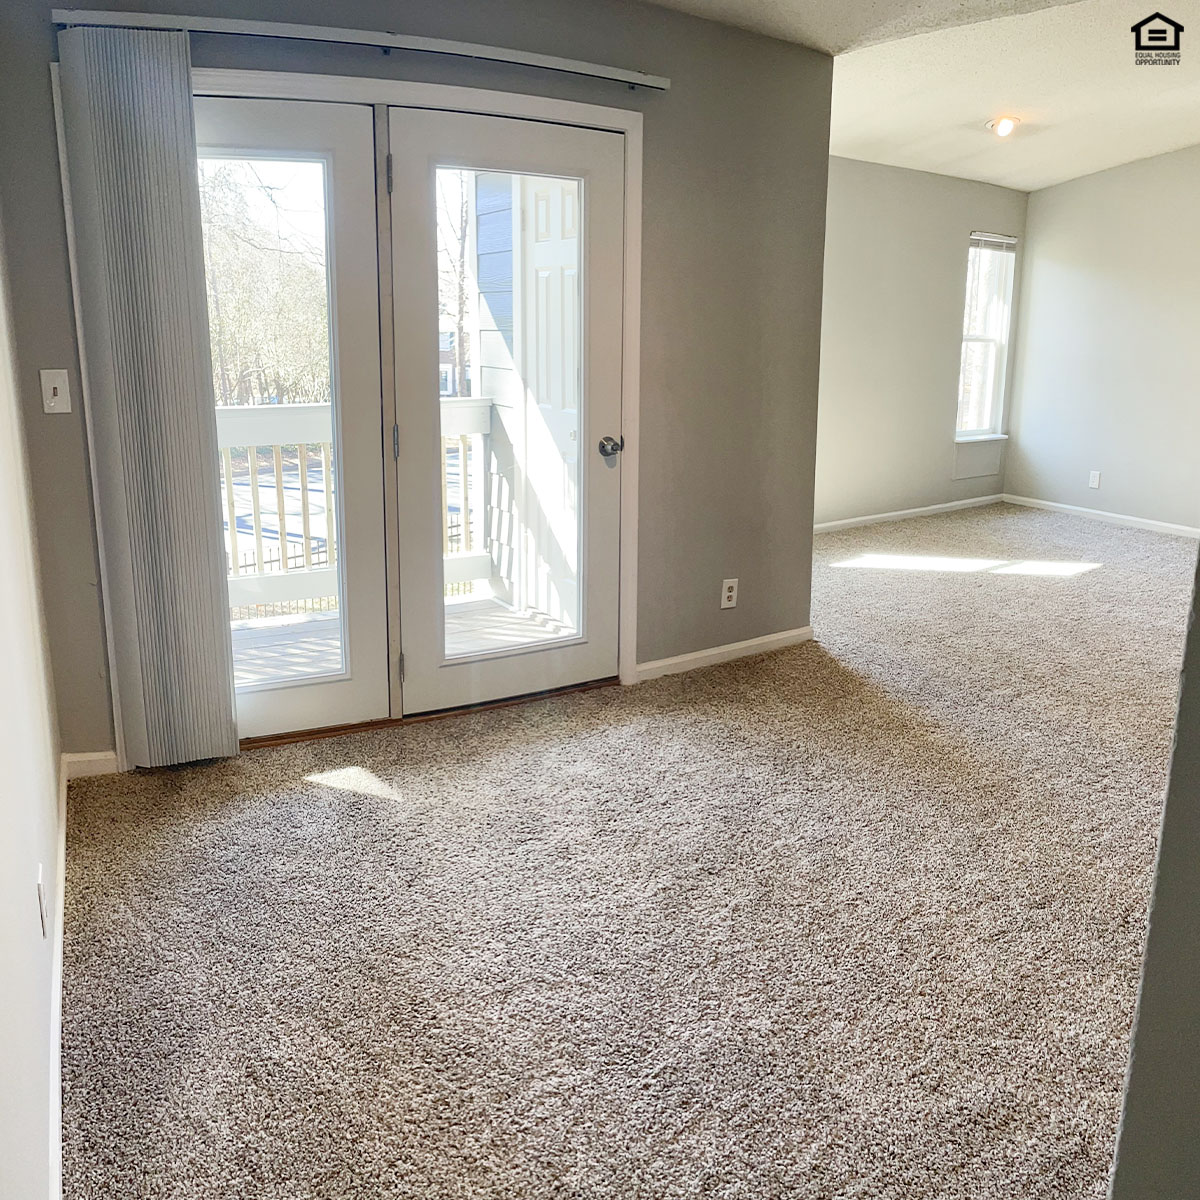 One word to describe this #Beechwood #apartment? Warm. ☀️💛

With plush carpeting and plenty of natural light shining in, every day is inviting and relaxing. Discover more now at beechwoodnc.net.